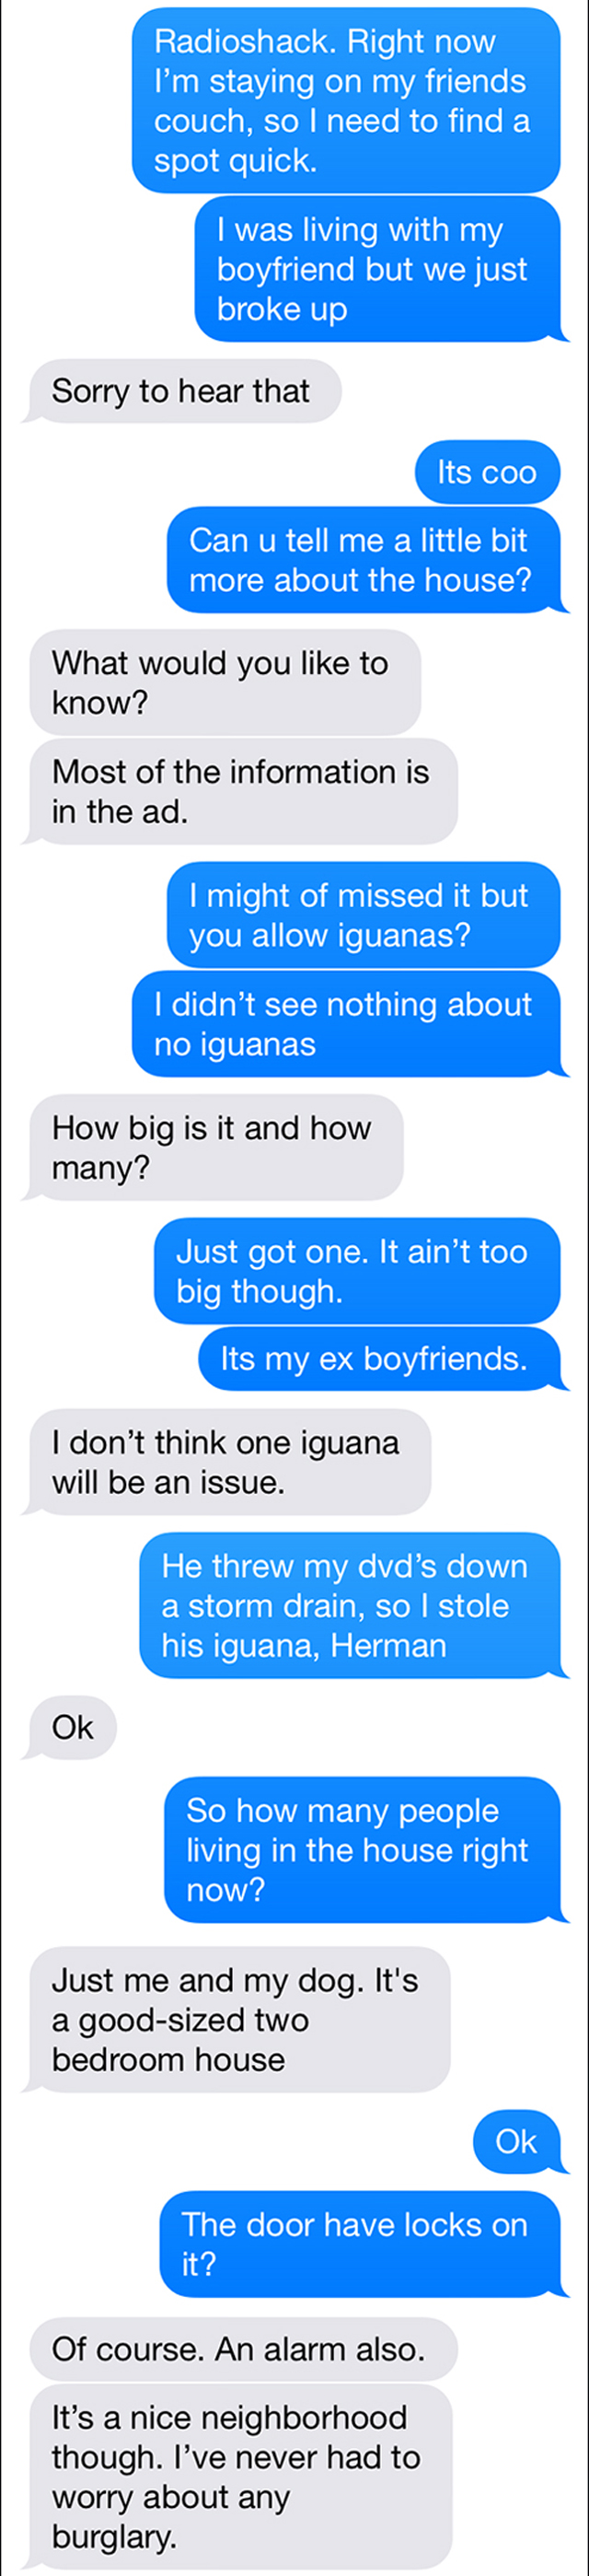 Text Trolling The Roommate Ad- The Tale Of The Iguana